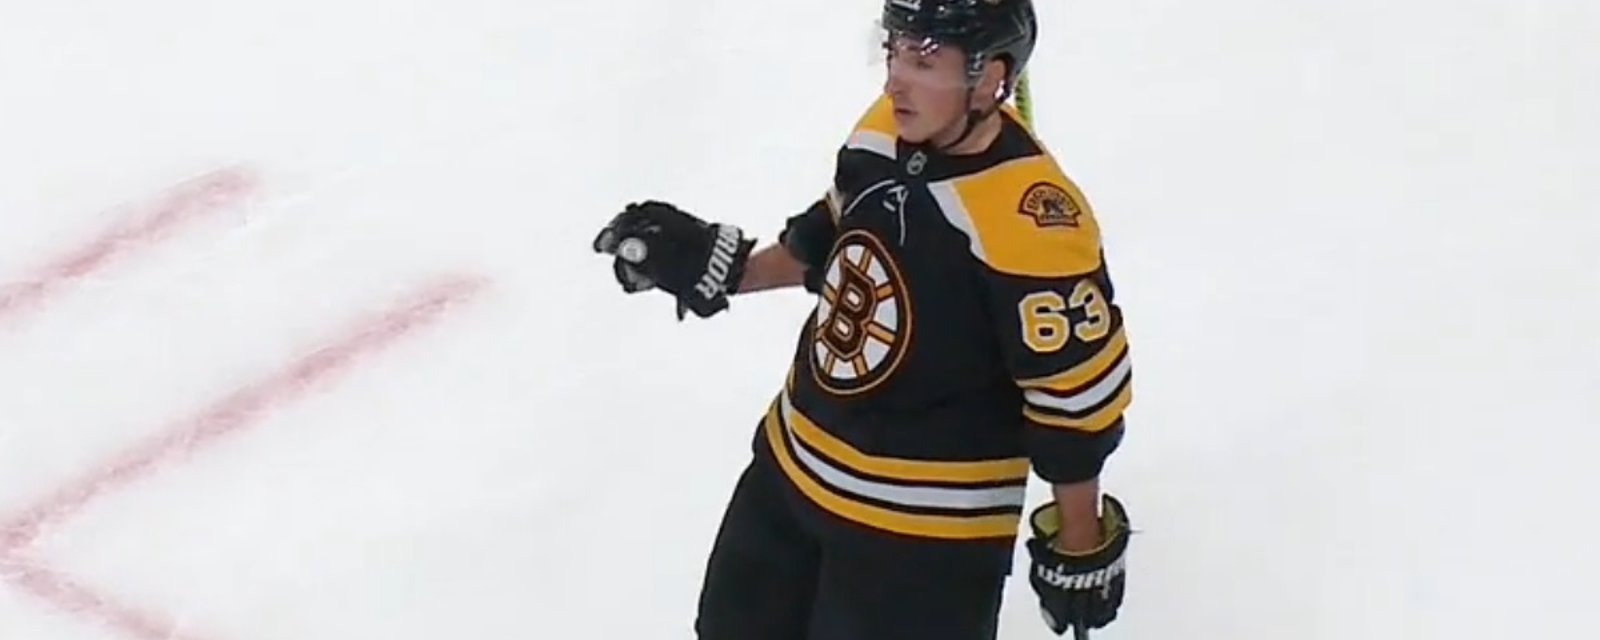 Marchand scores the OT winner and drops one of the best goal celebrations of the year!